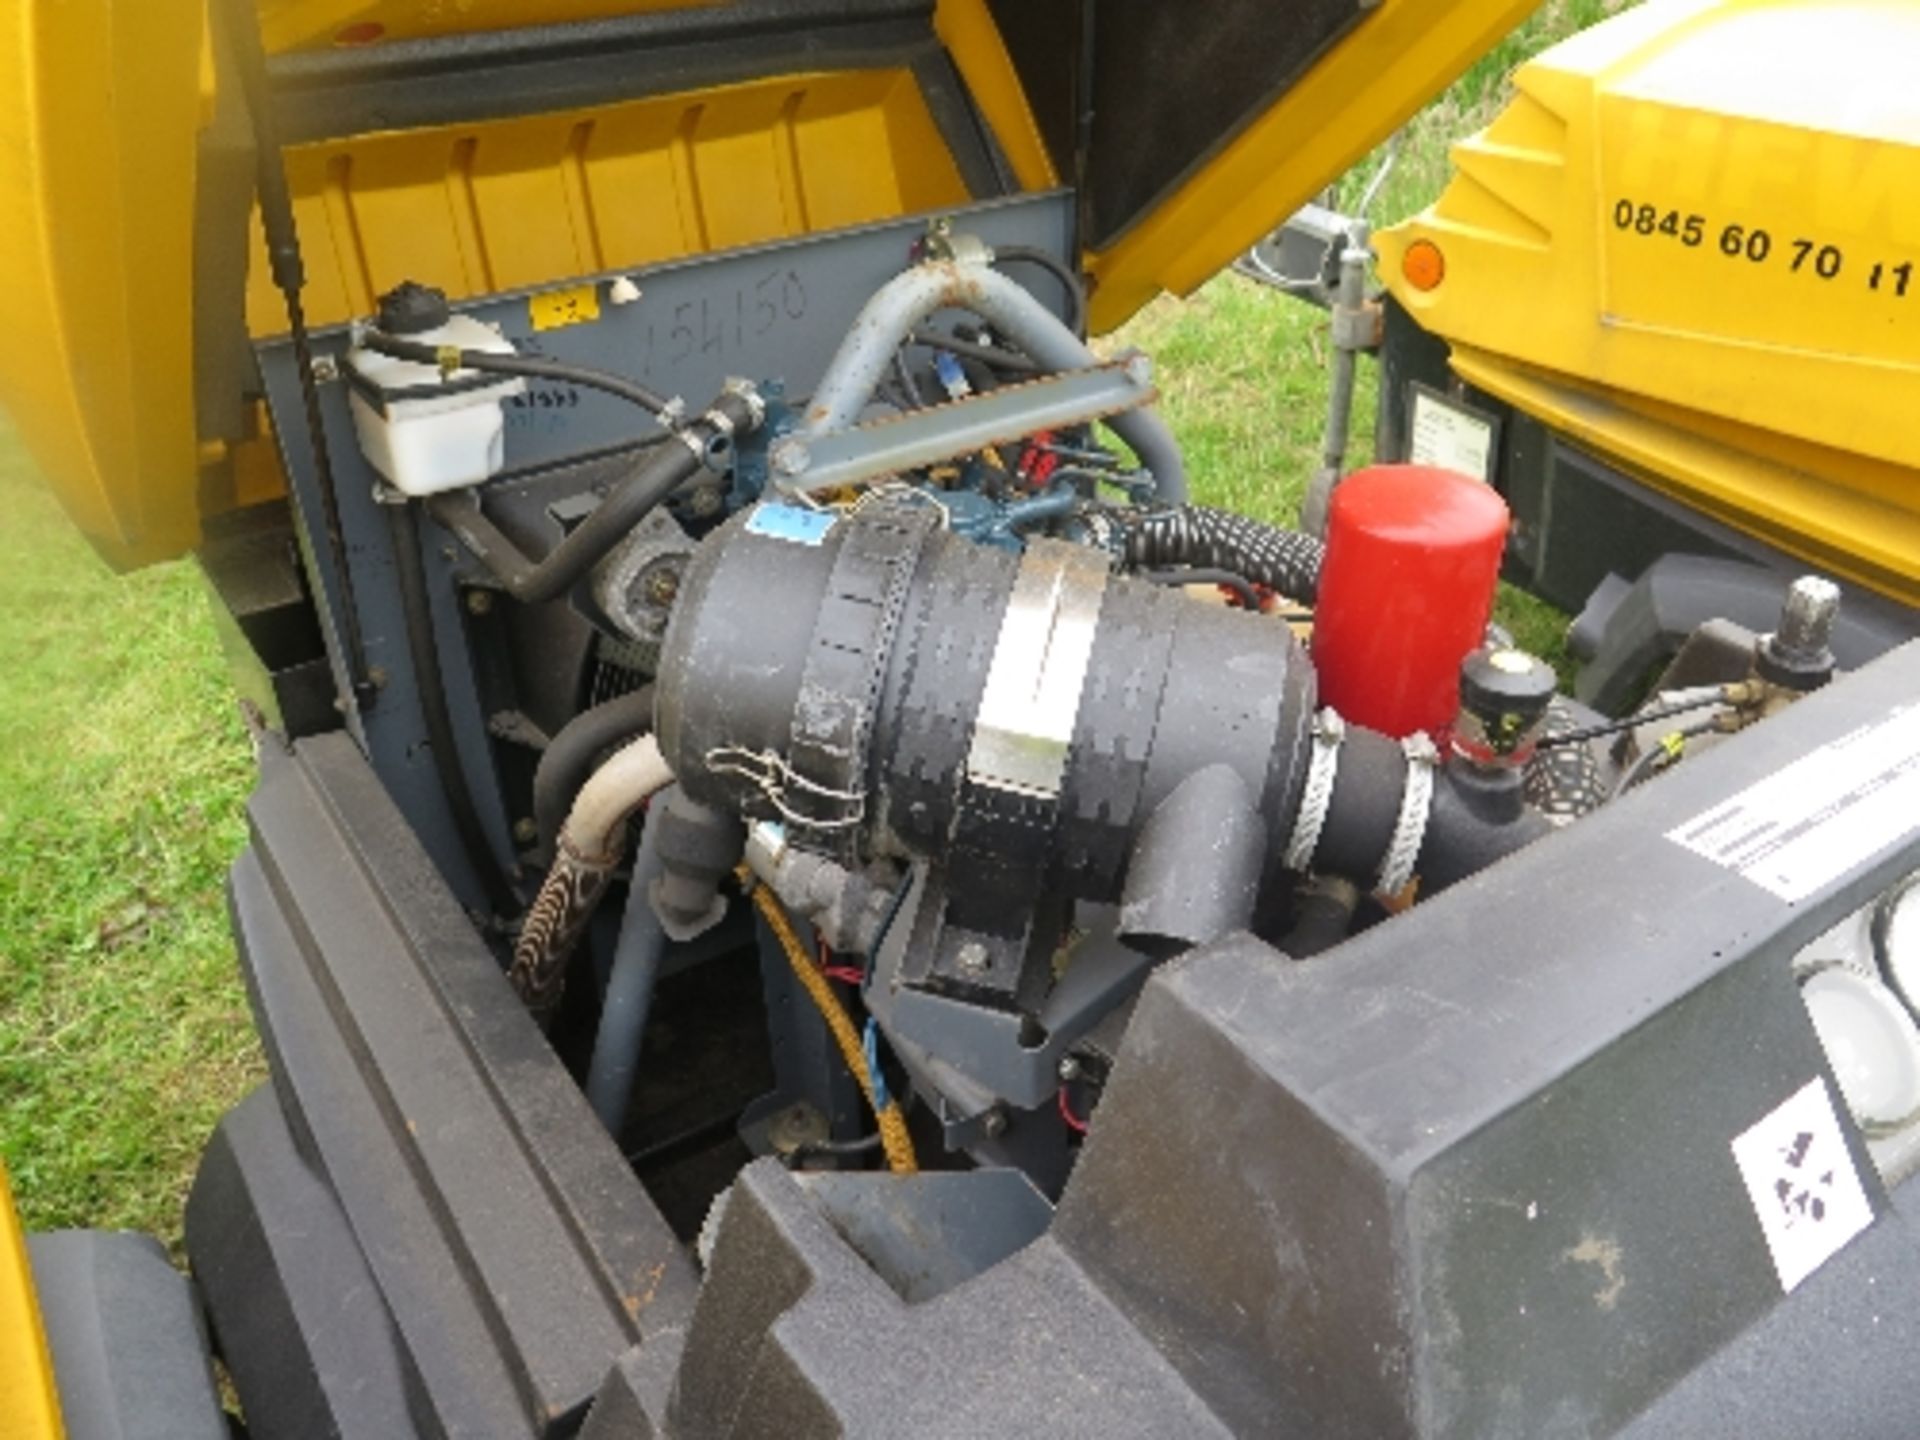 Atlas Copco XAS47 compressor 2007 154150
857 HOURS - KUBOTA POWER - RUNS AND MAKES AIR
ALL LOTS - Image 5 of 5